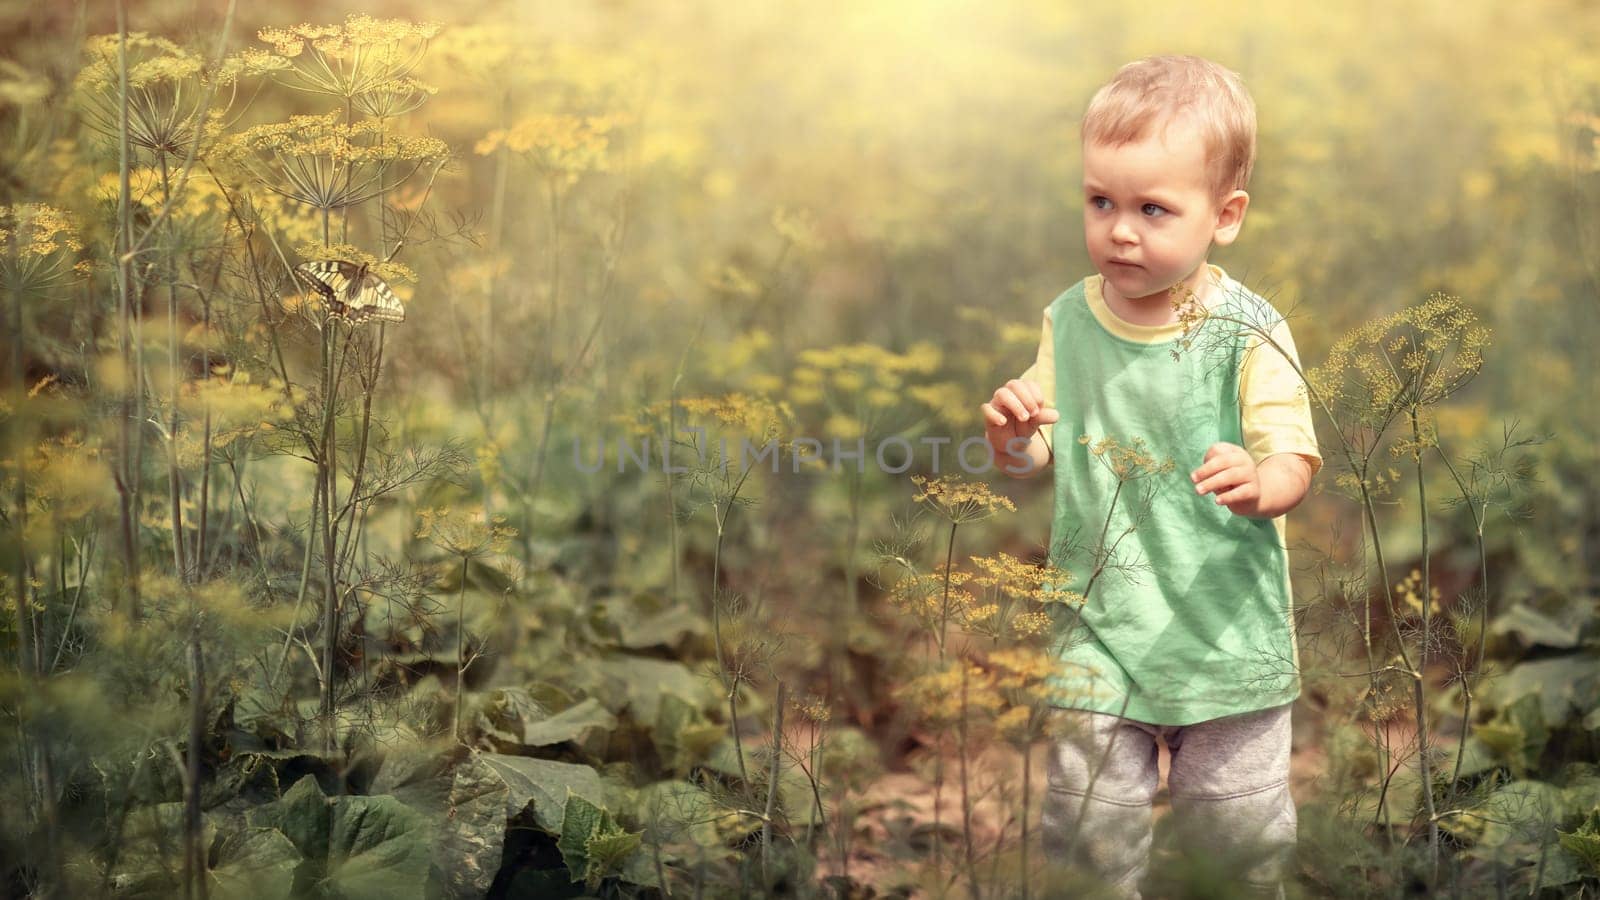 A little boy catches a butterfly in the fabulous world of plants by Lincikas